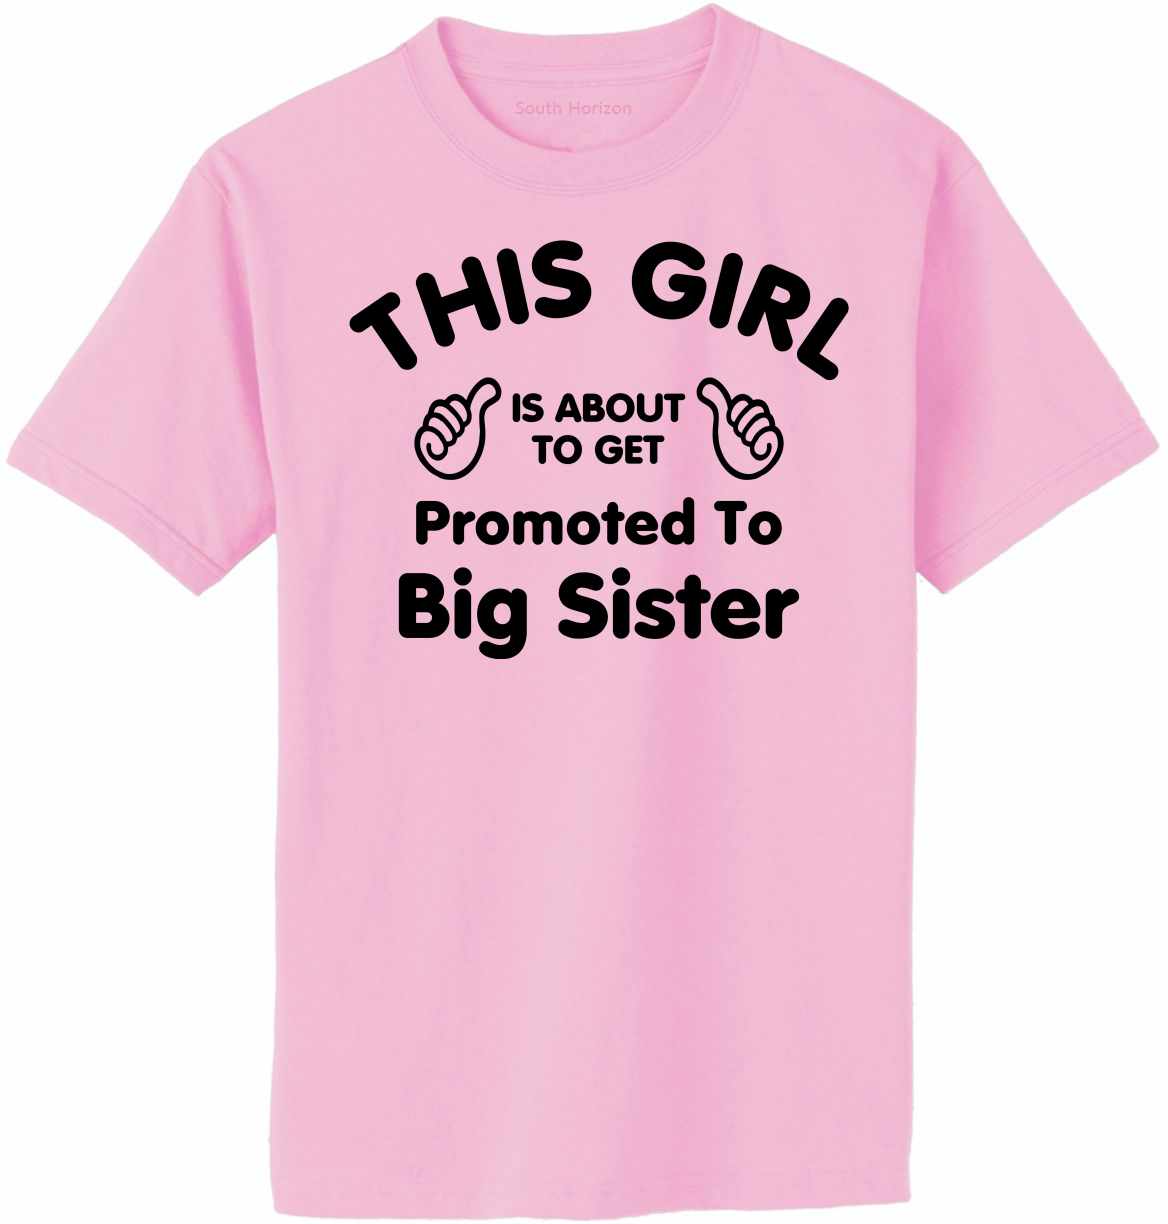 This Girl is About To Get Promoted To Big Sister Adult T-Shirt